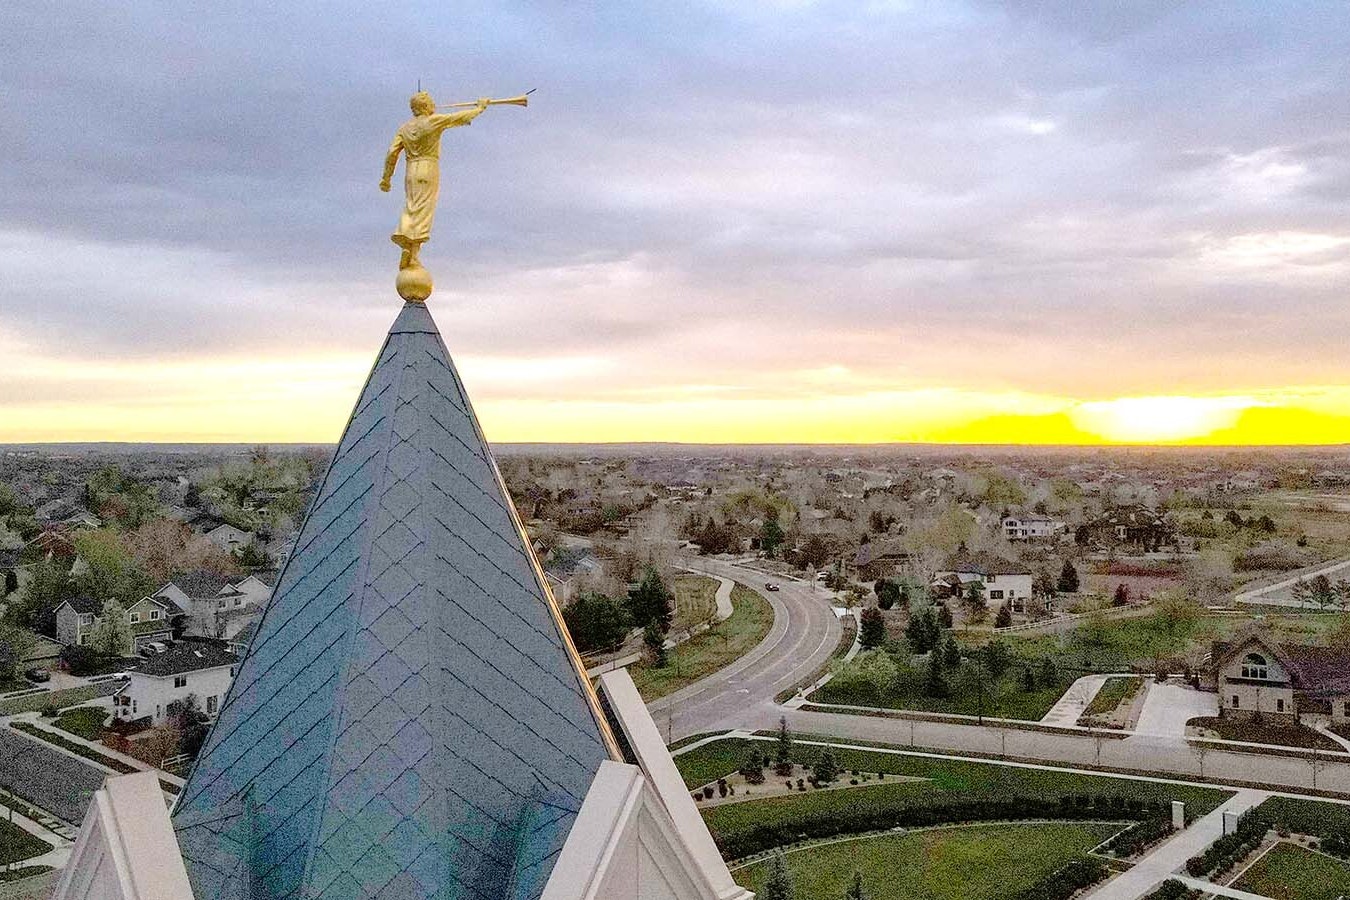 The steeple, topped with a sculpture of the Angel Moroni, towers above southeast Fort Collins. The Church of Jesus Christ of Latter-day Saints temple was built in 2016. The height of a proposed 77-foot steeple has been the major sticking point in a planned temple in Cody.